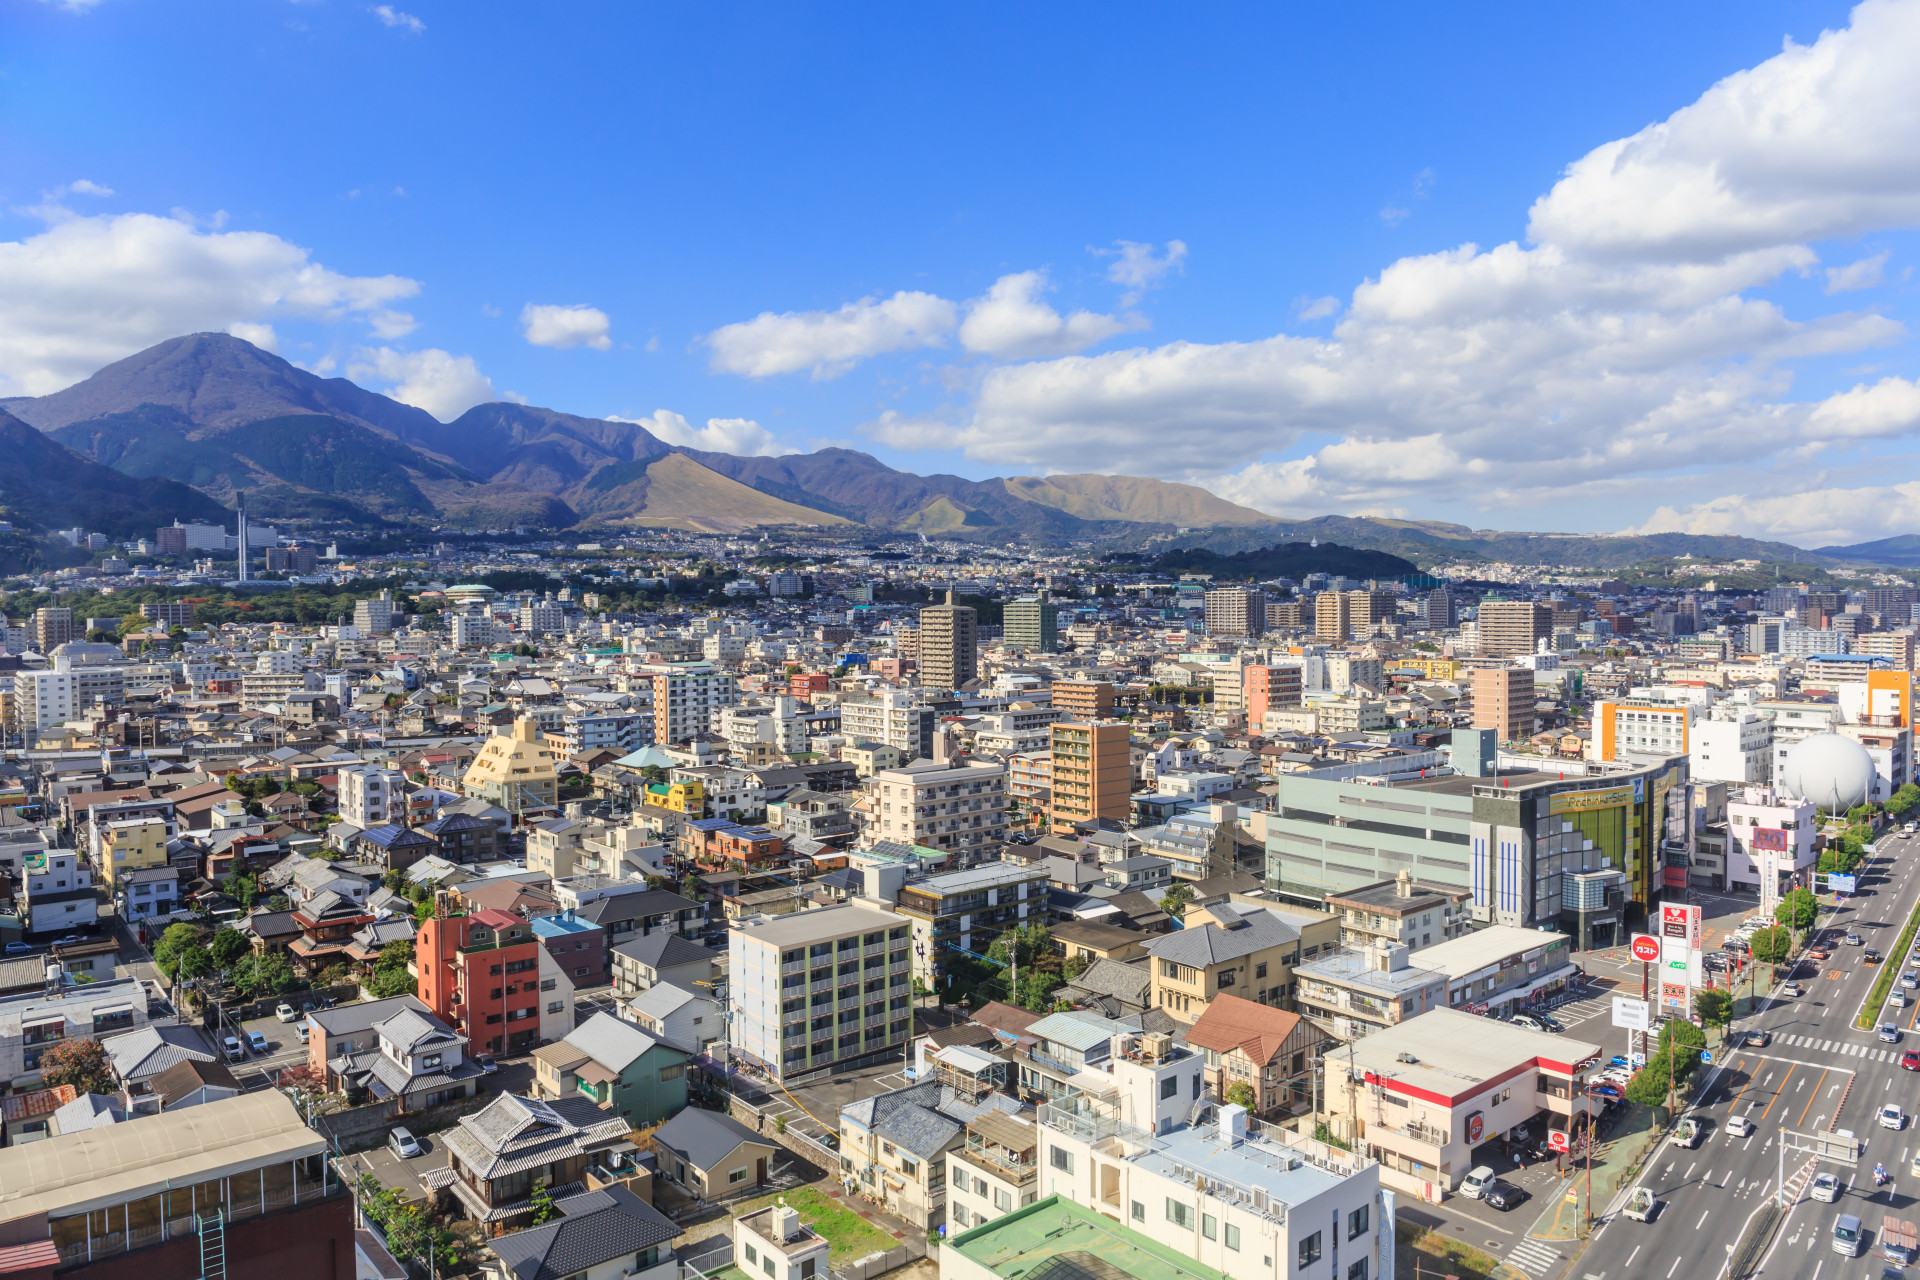 Welcome! We are in the city of Beppu, Japan! Unlike a lot of Japanese towns, Beppu has quite a young population, partly thanks to the Asia Pacific University, which attracts students from around the world.